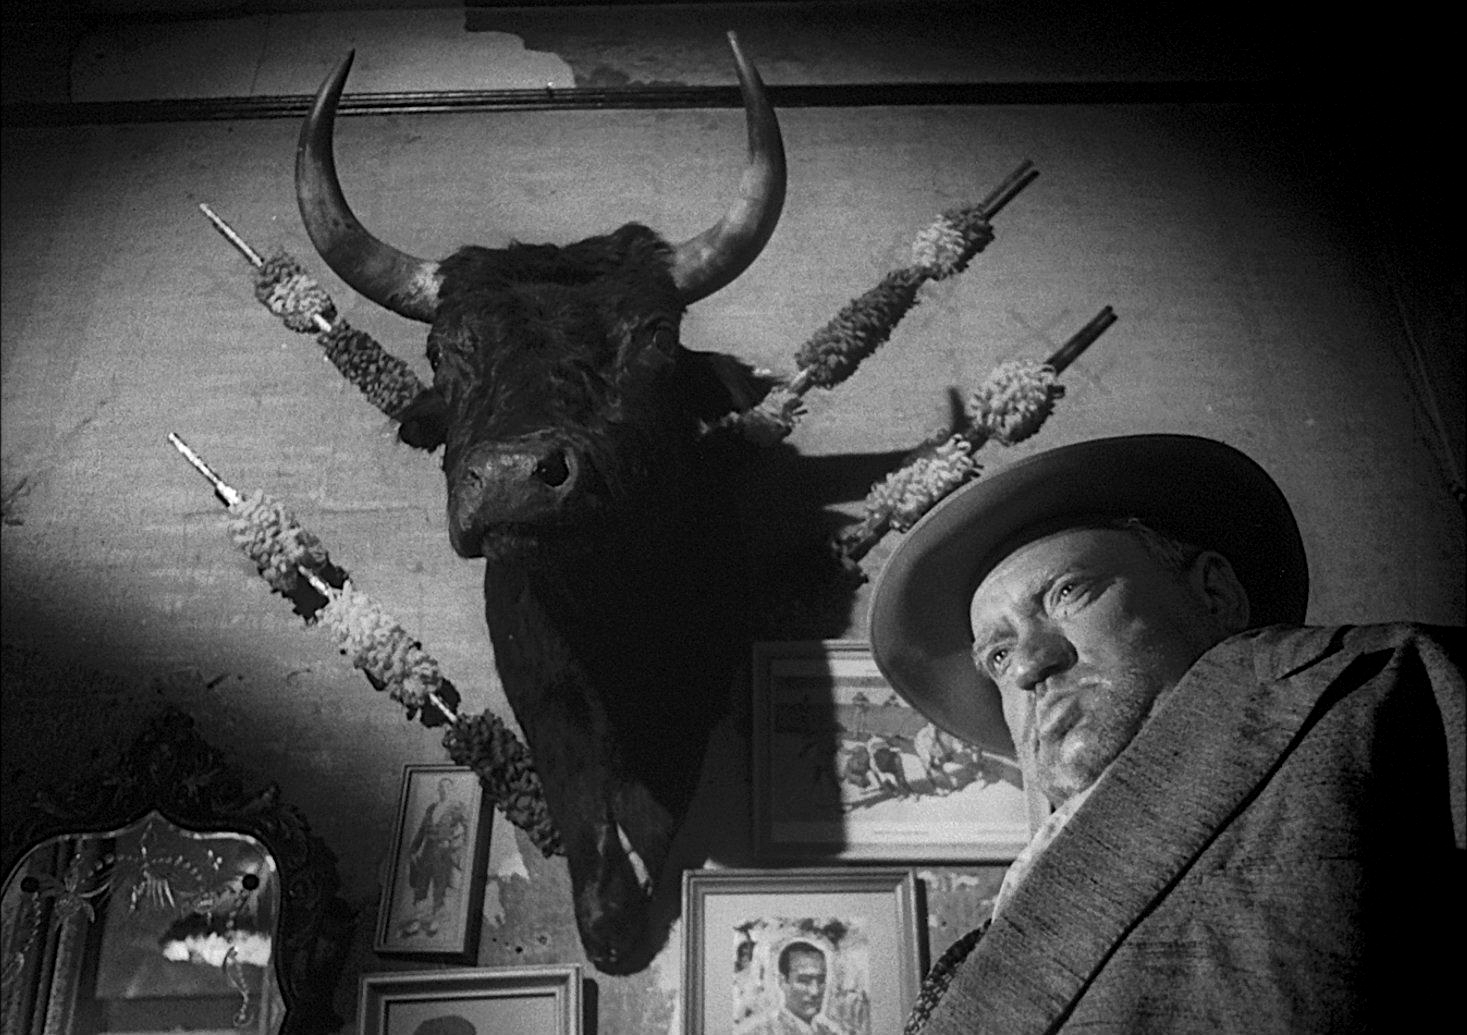 Touch of Evil (Orson Welles, 1958)